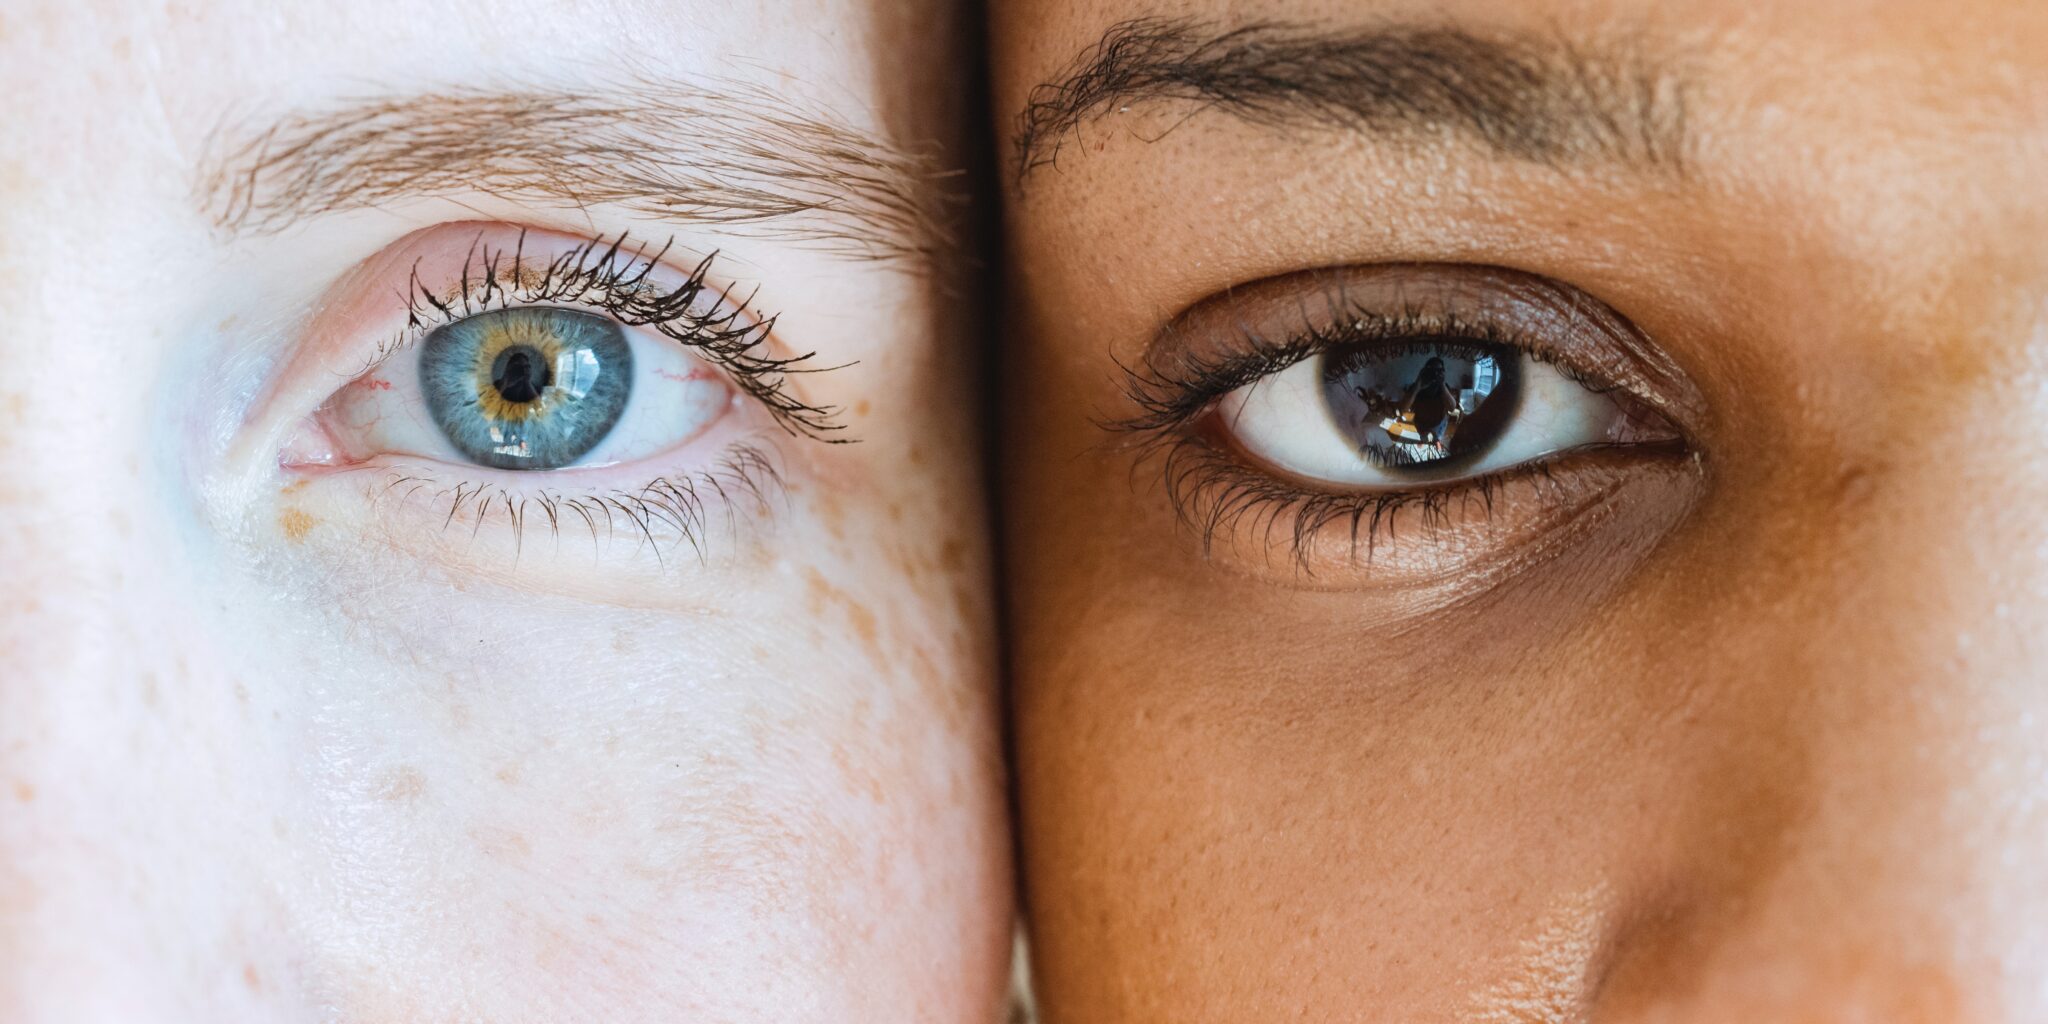 The picture shows a detail of two faces with different colours and skin tones as a metaphor for different brand personalities.